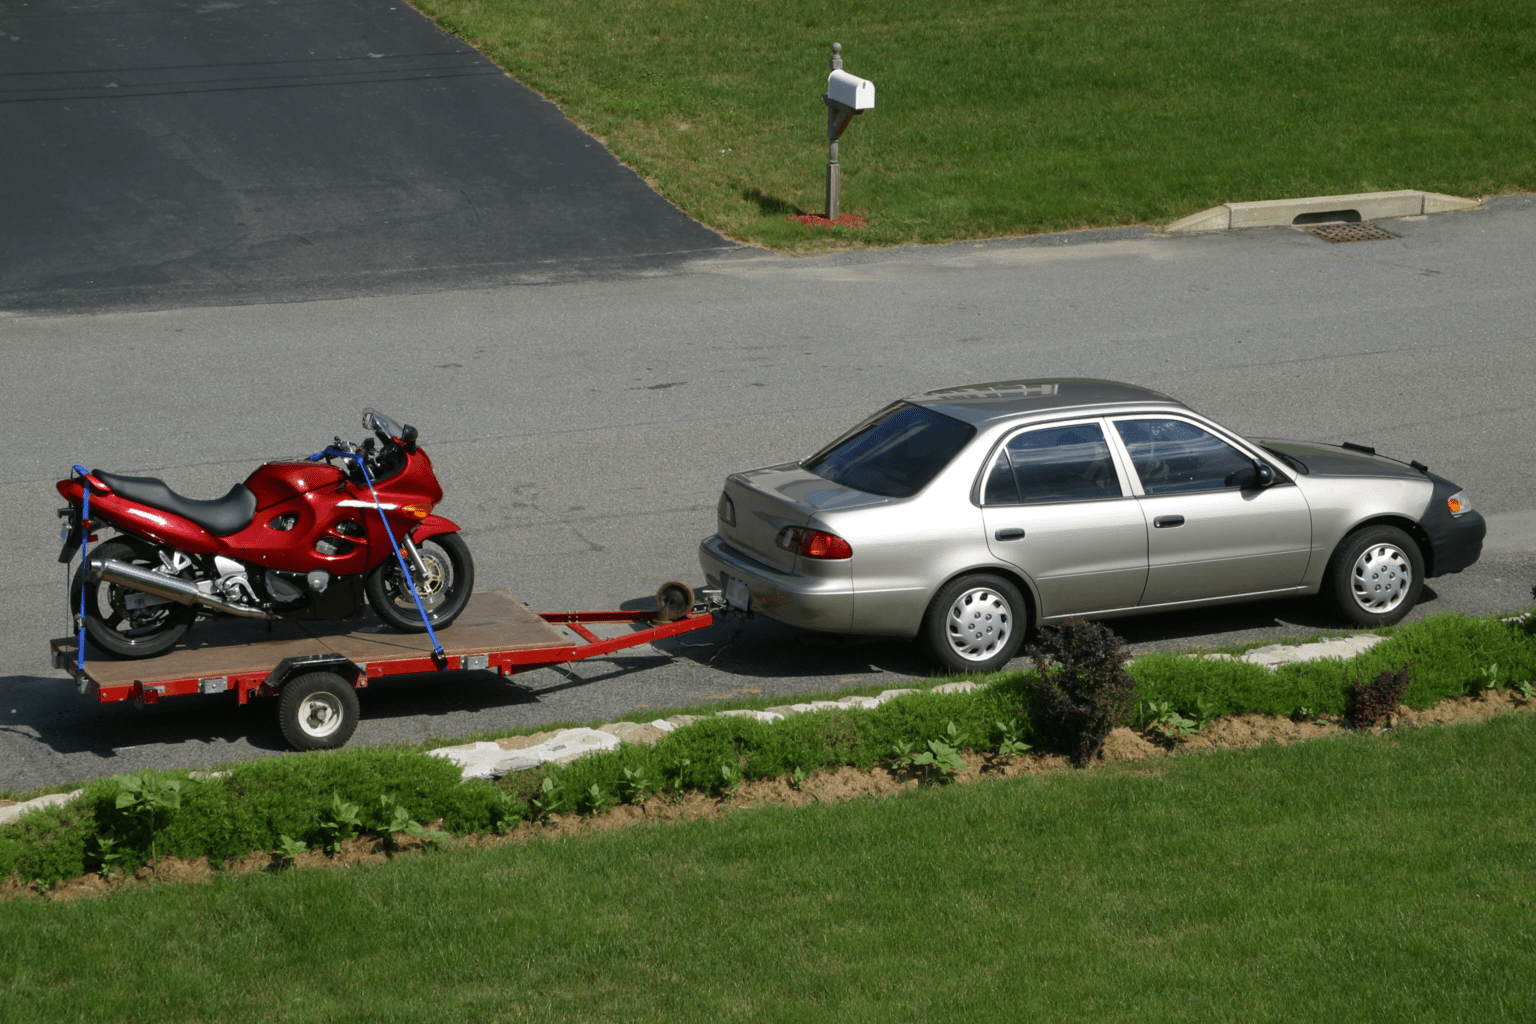 this image shows motorcycle towing in Highlands Ranch, CO